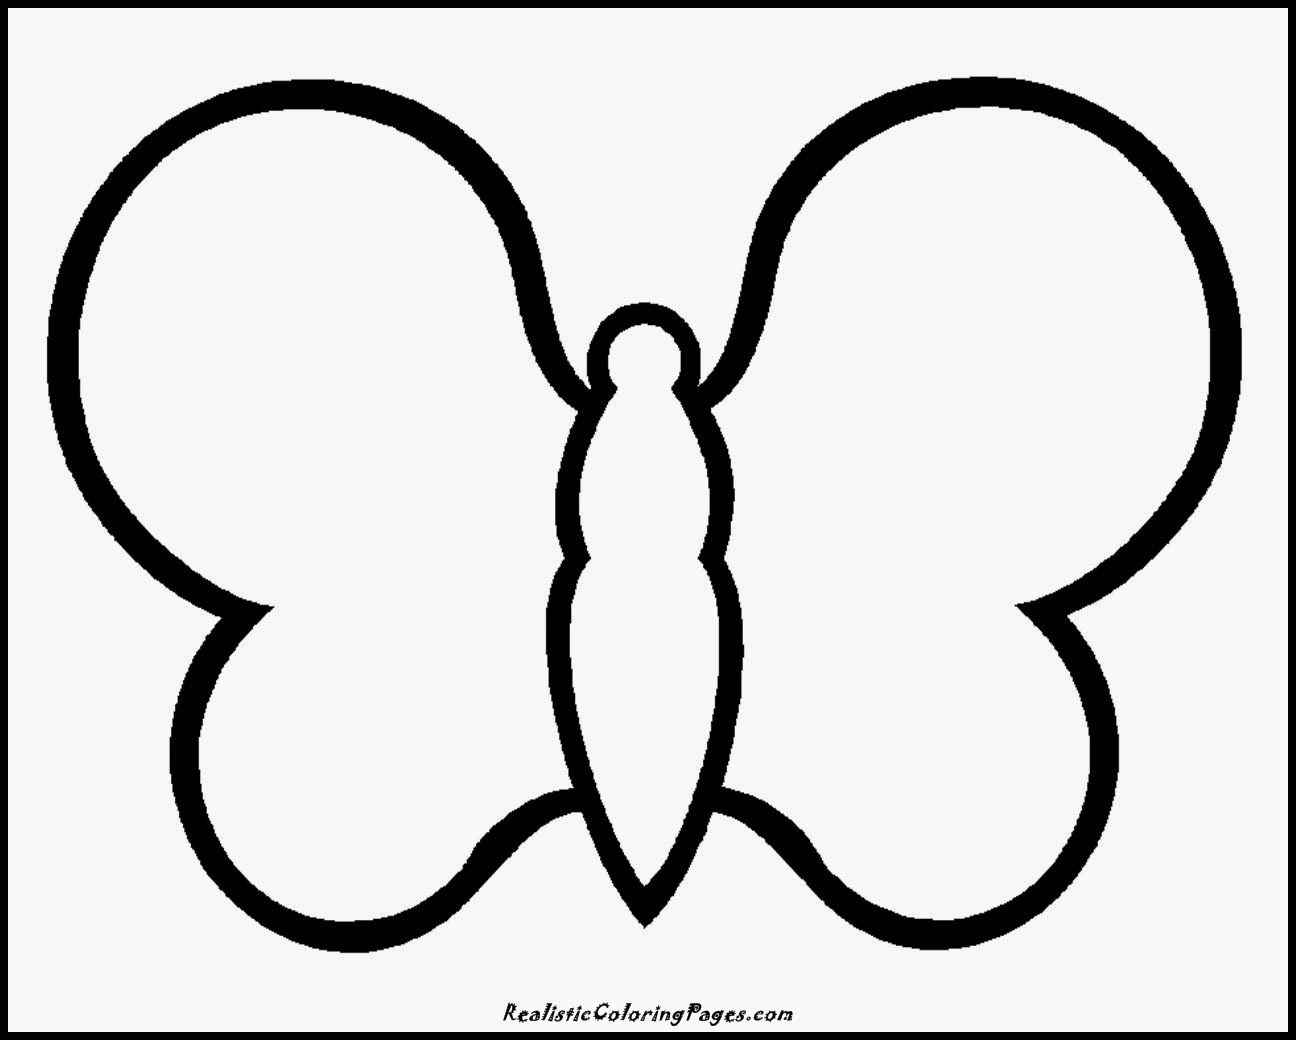 Simple Animal Coloring Pages | Realistic Coloring Pages